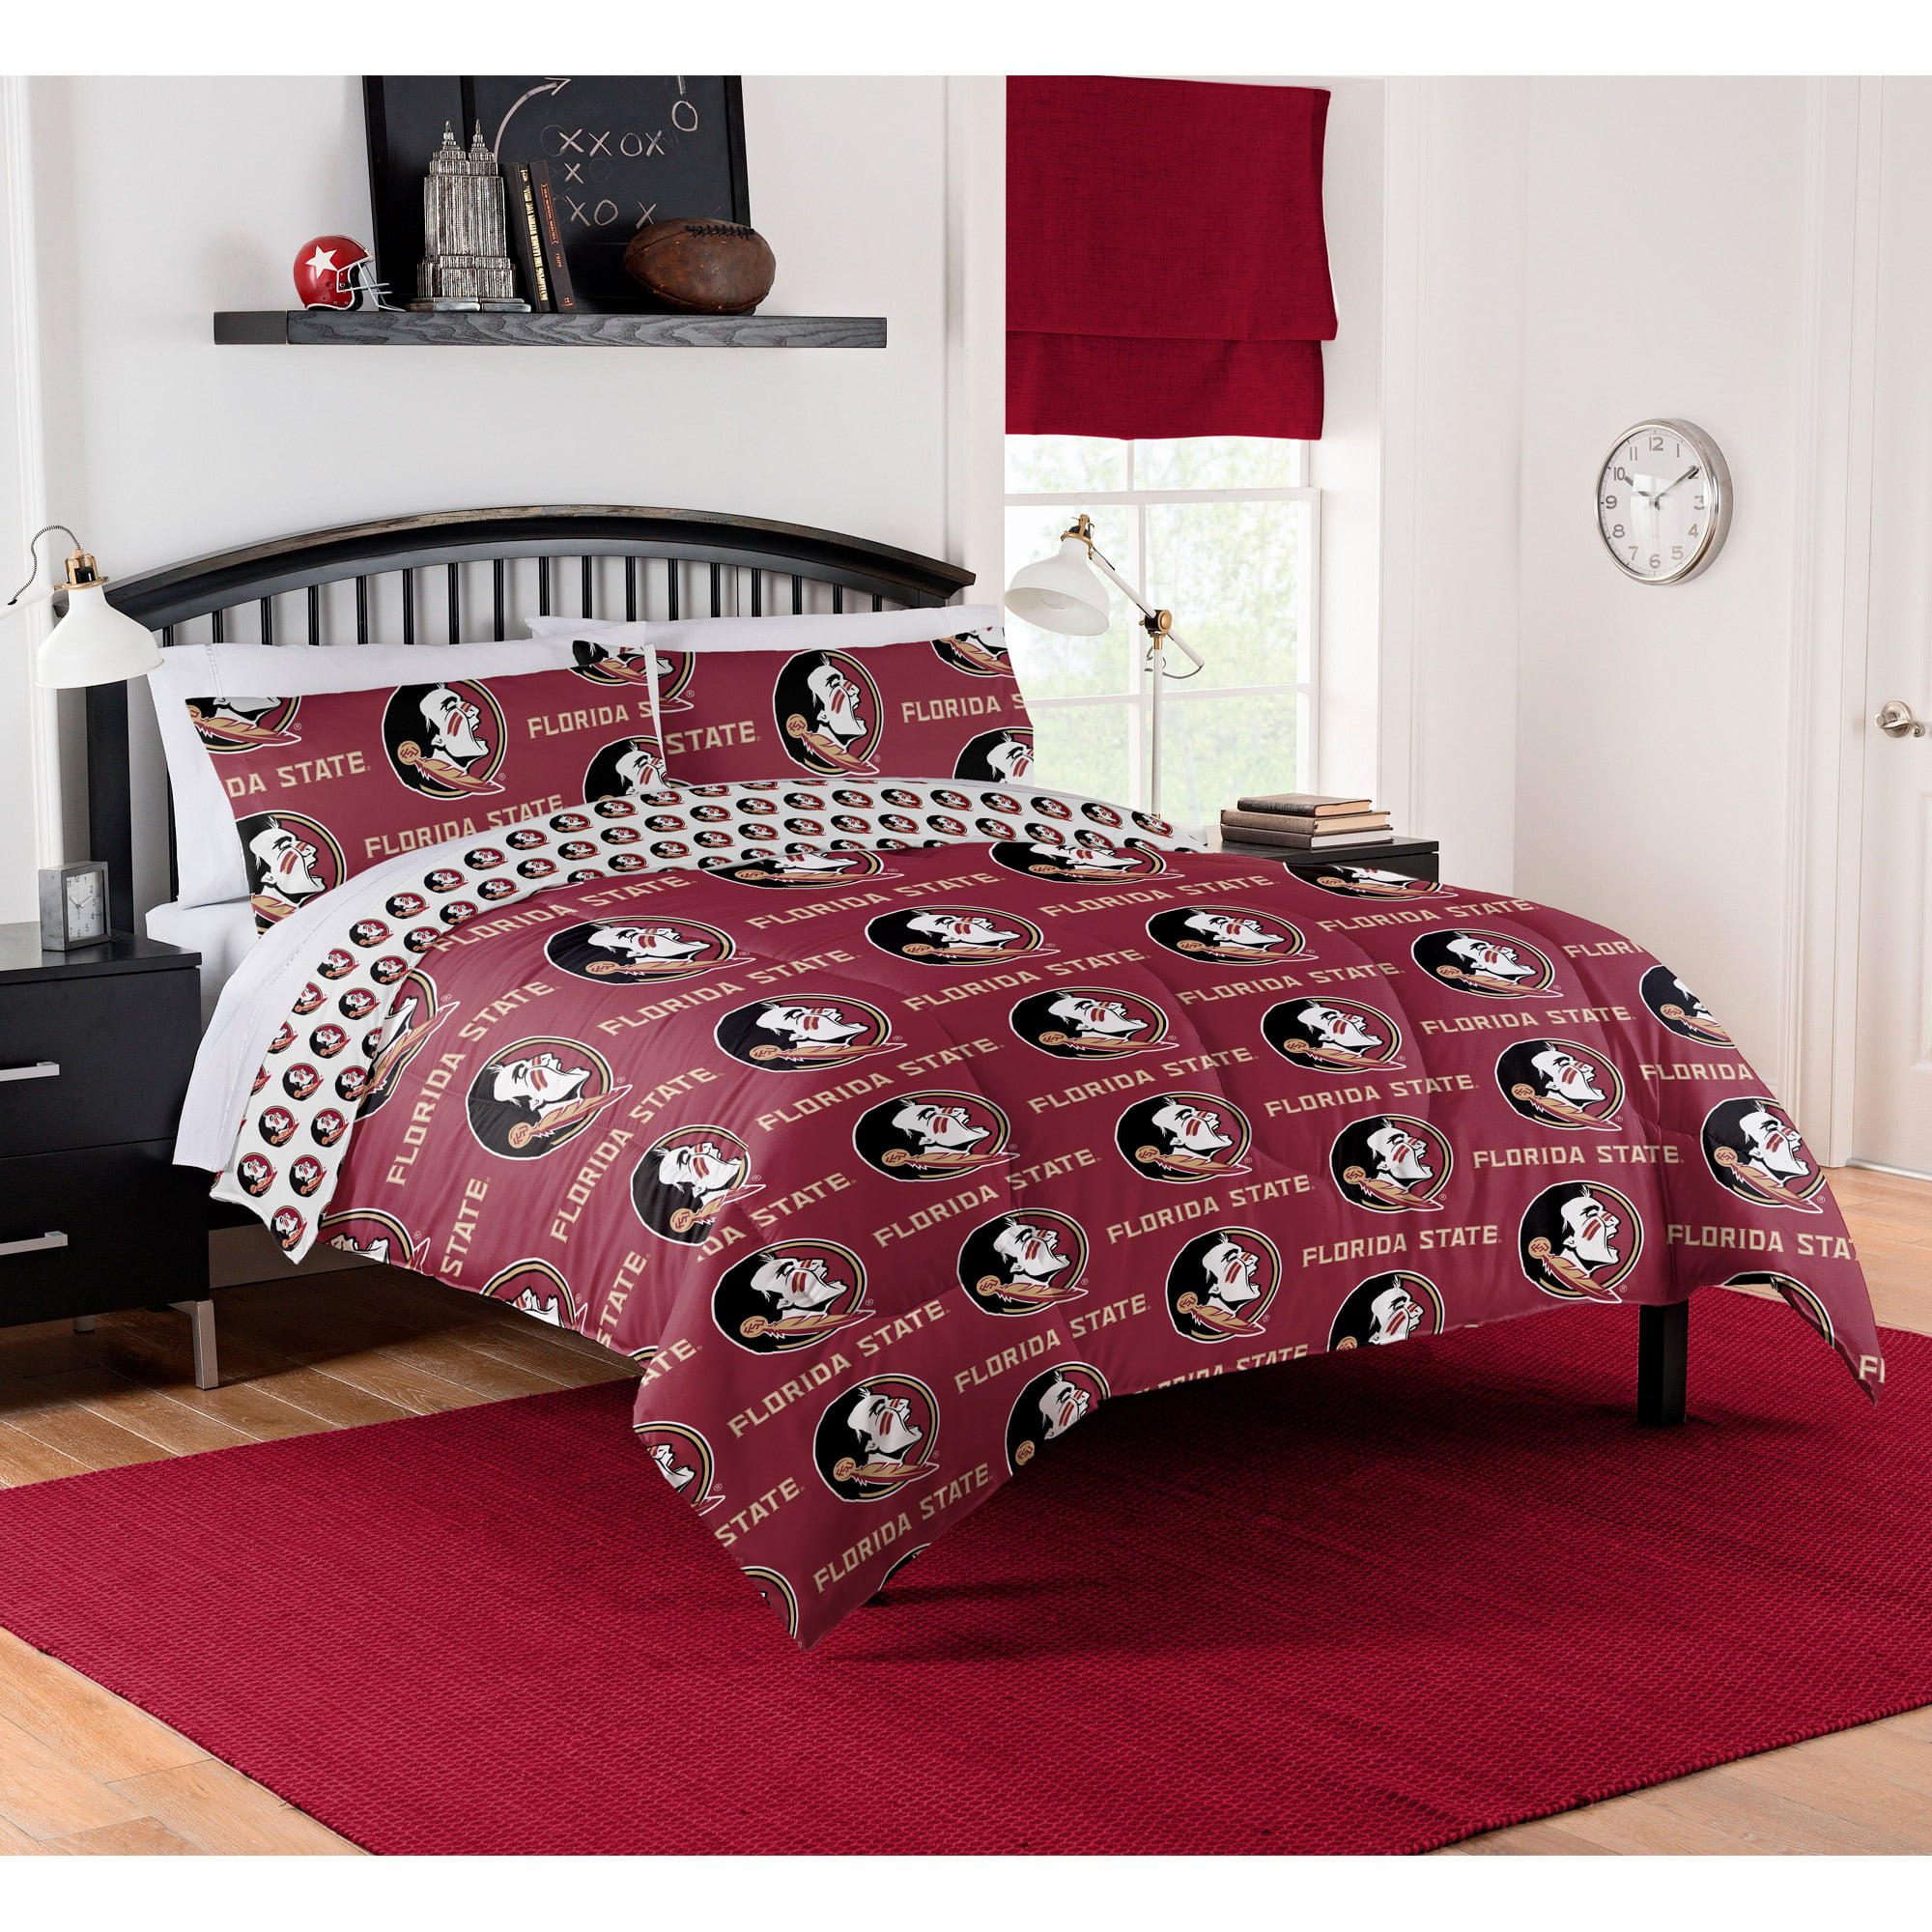 Includes 1 full//queen comforter 1 throw 1 rug and 2 cloud pillows 1 queen flat sheet NCAA Florida State Seminoles Affiliation Bedding Set 2 pillowcases 1 queen fitted sheet 1 blanket